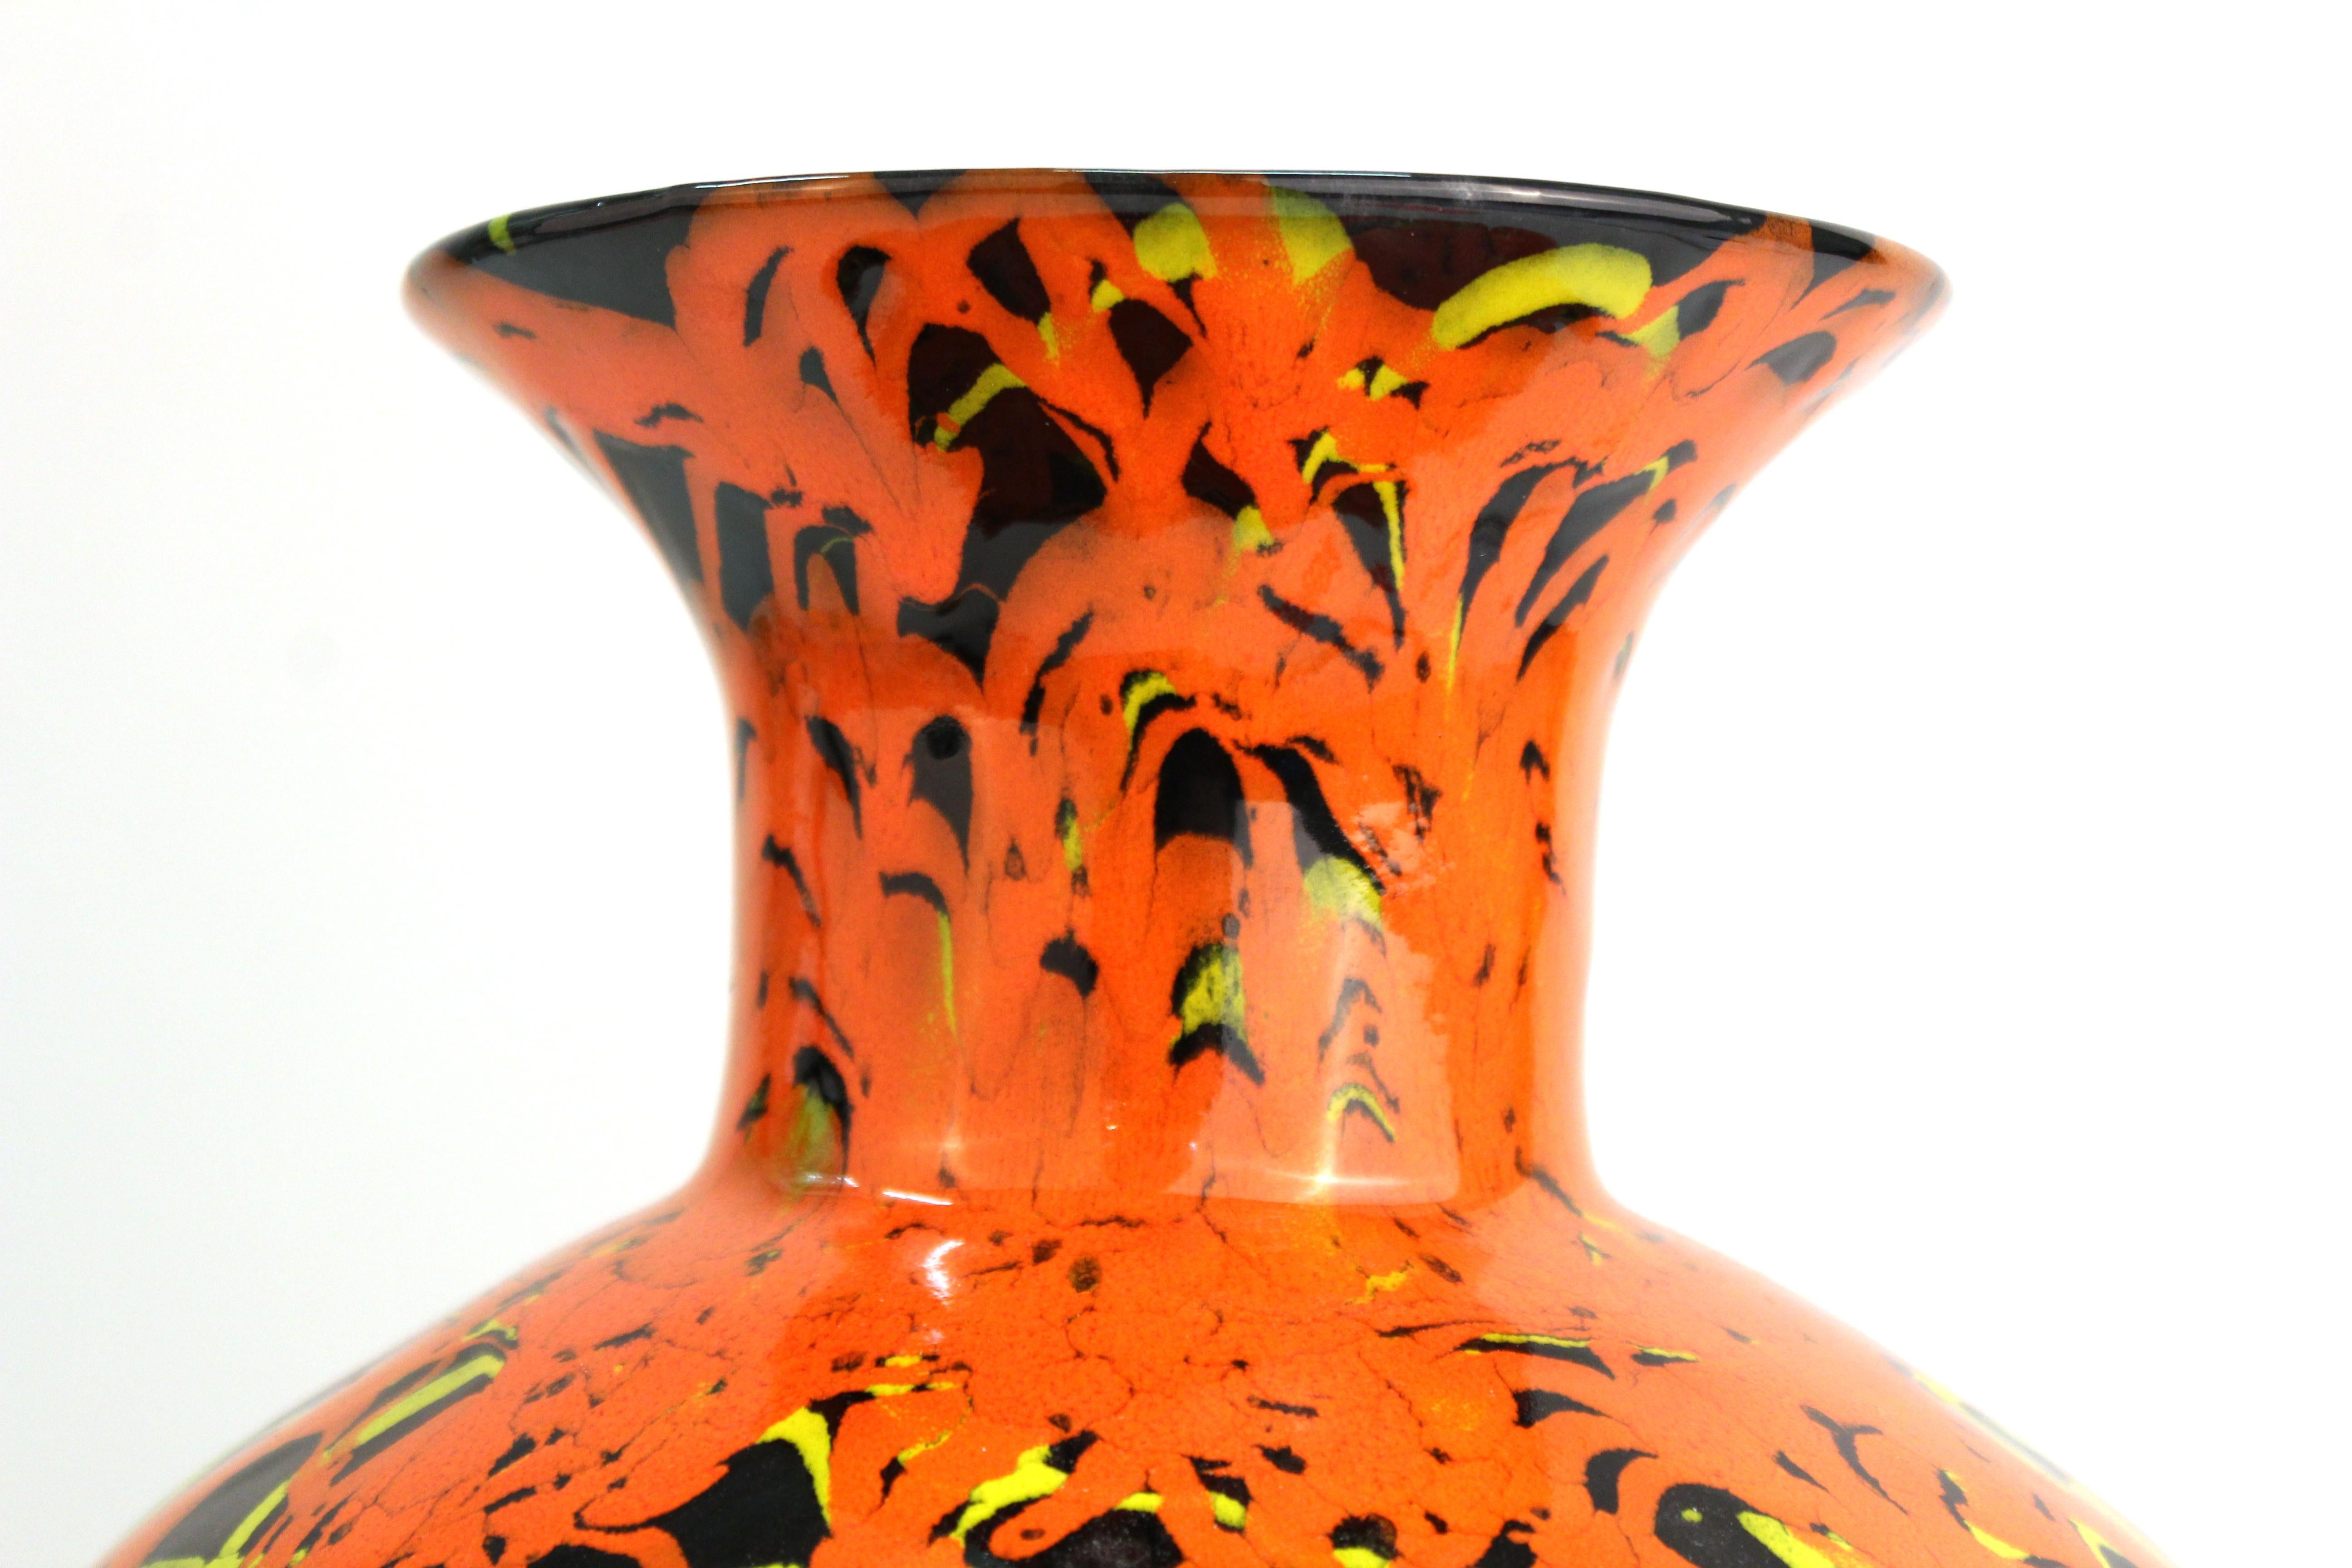 Modern studio art pottery vase in baluster shape. The piece has orange and red drip glaze on the upper part, on a black base. In great vintage condition with age-appropriate wear and use.